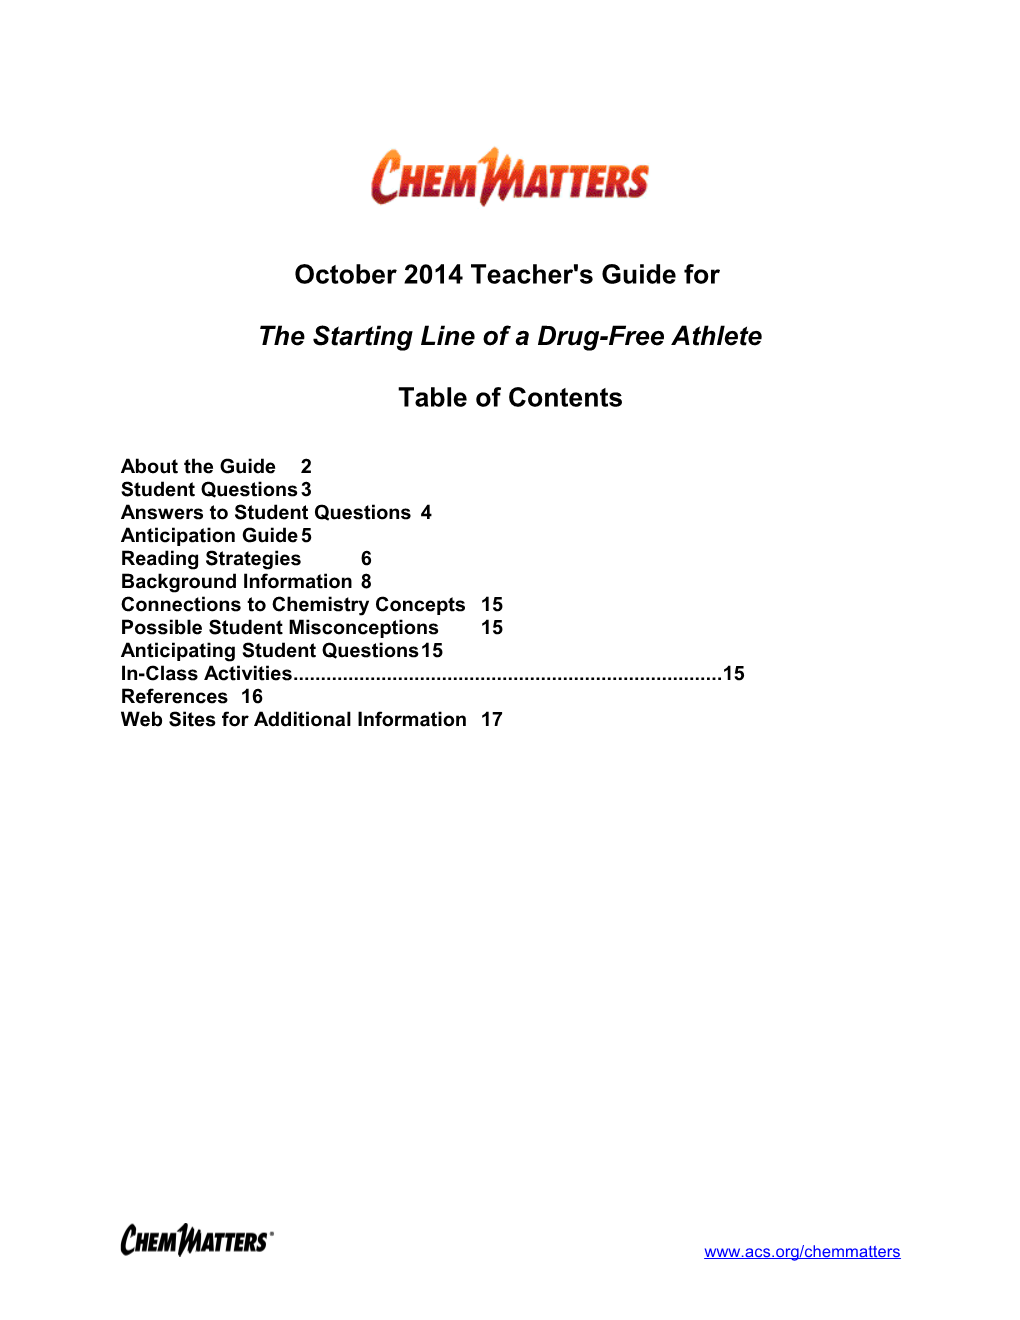 The Starting Line of a Drug-Free Athlete